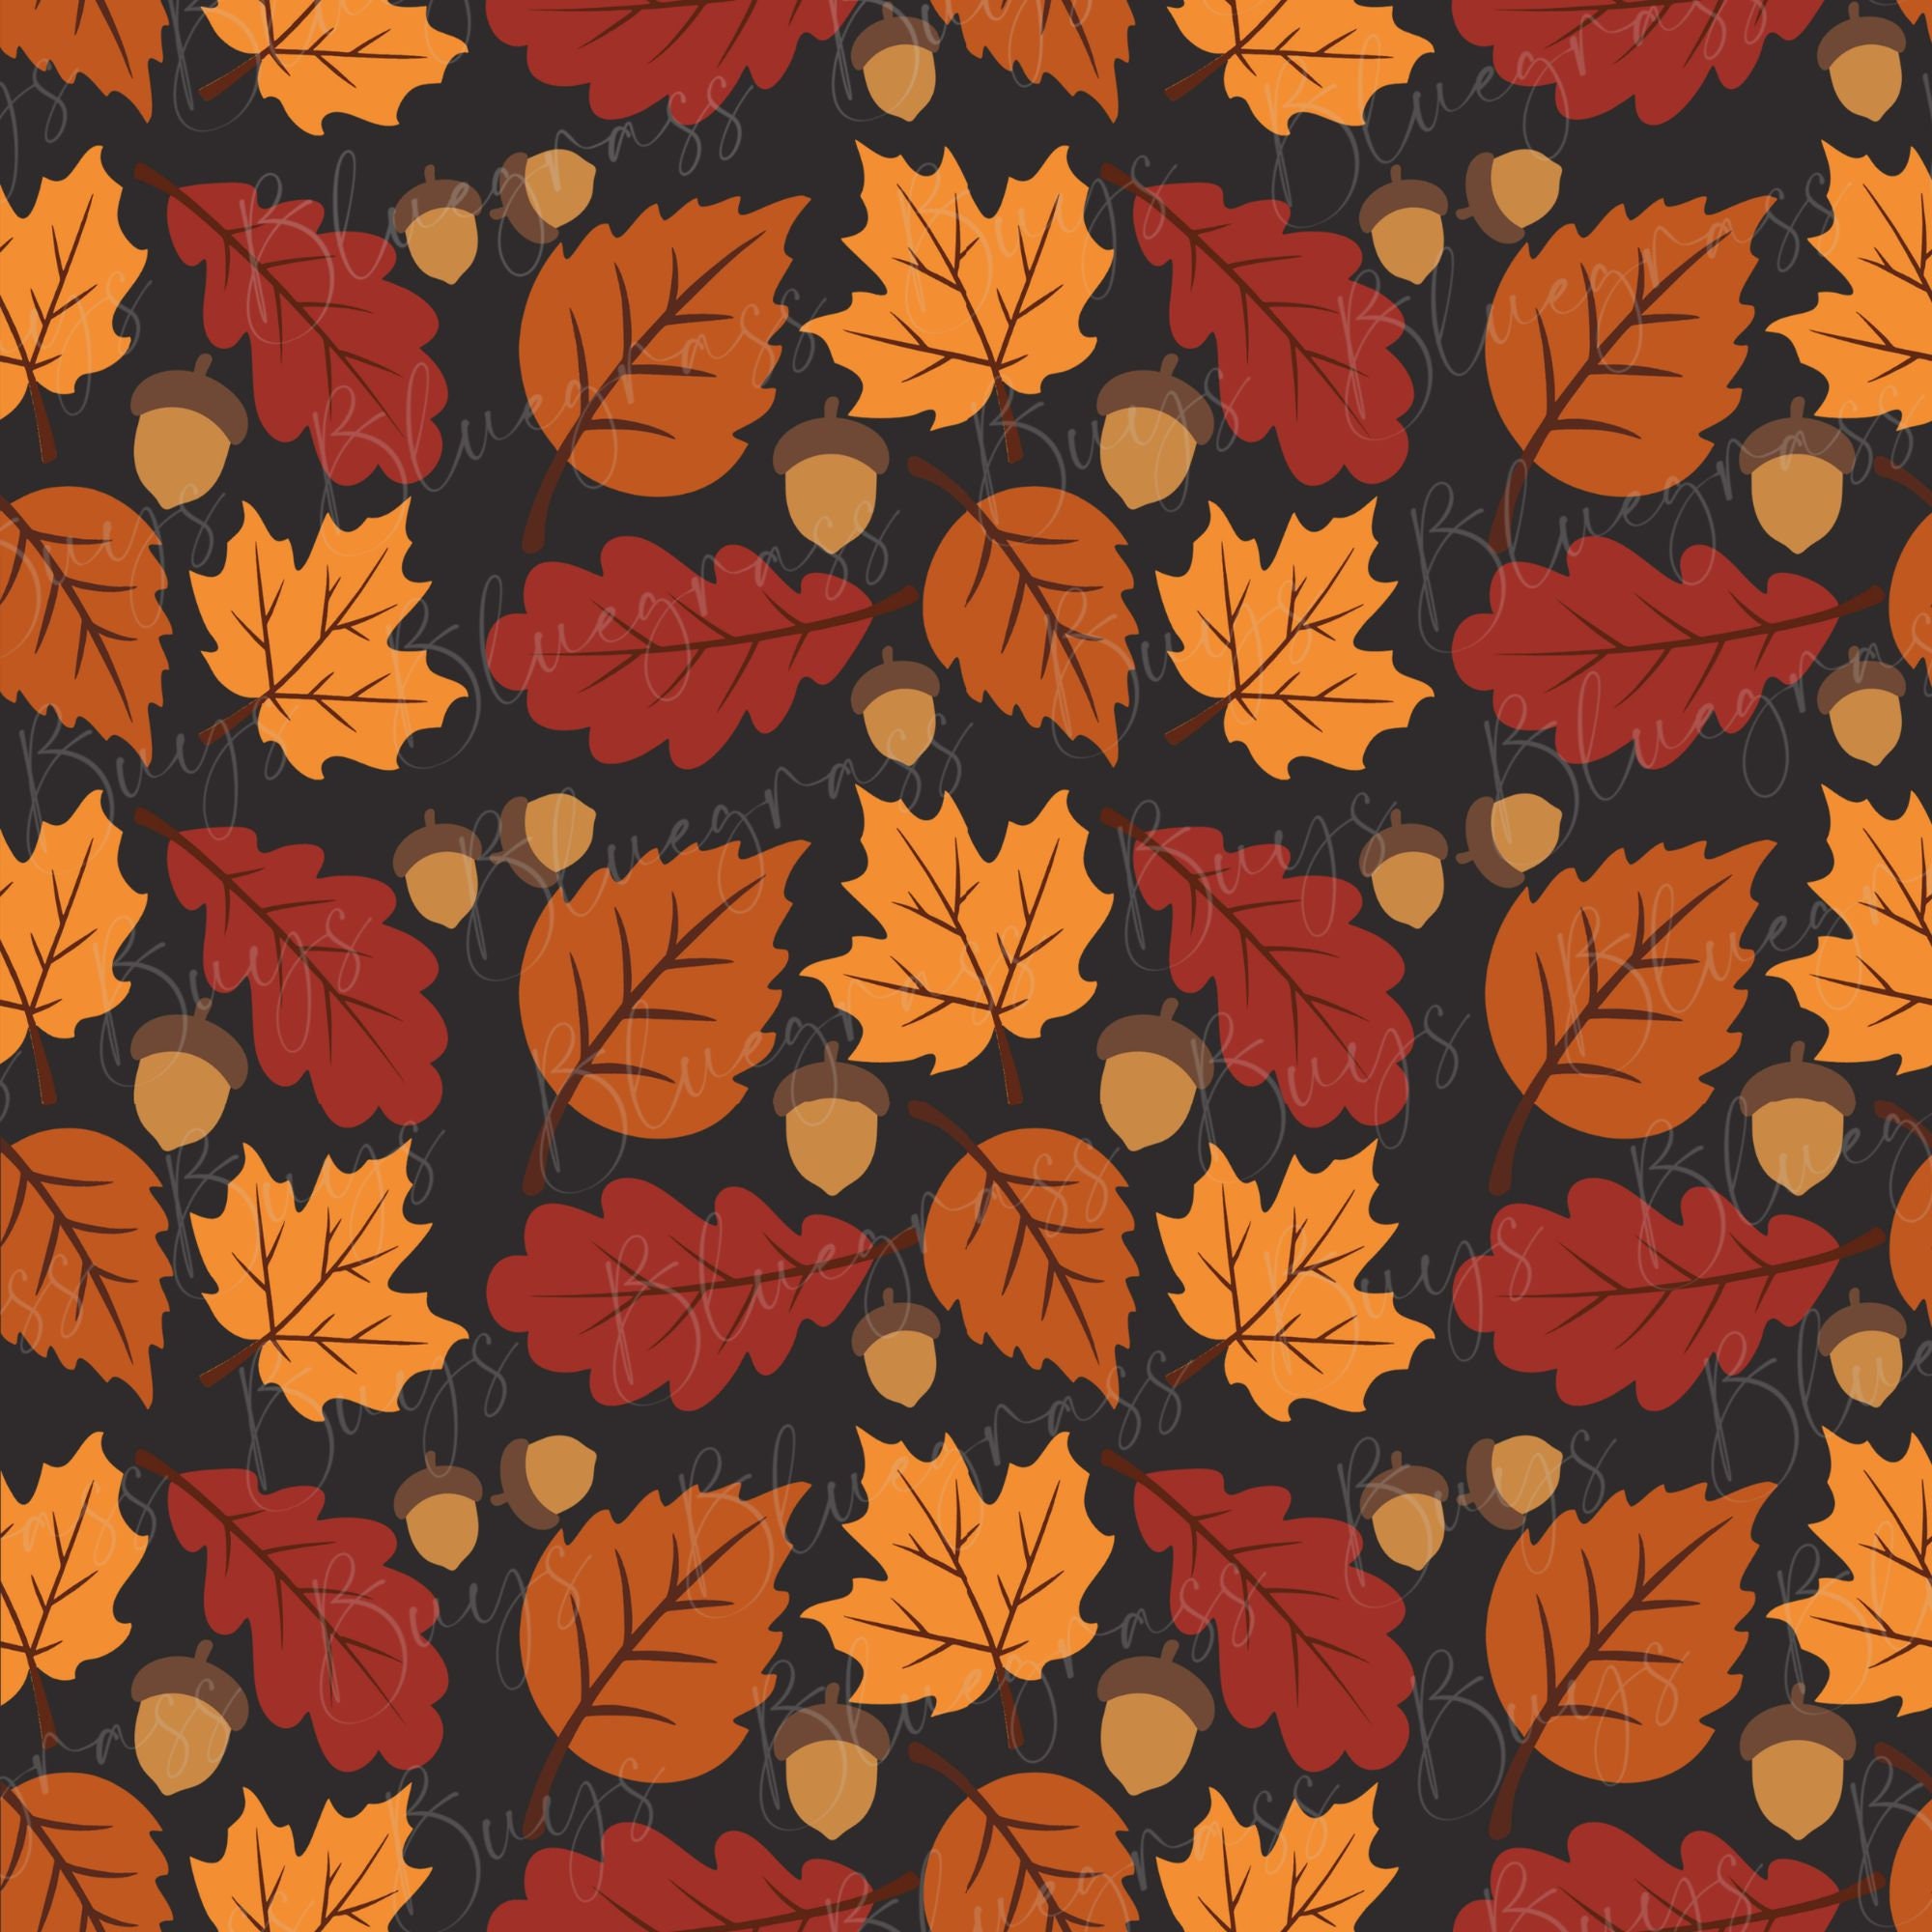 Autumn Leaves Seamless Pattern - Fall Background - Autumn Digital Paper